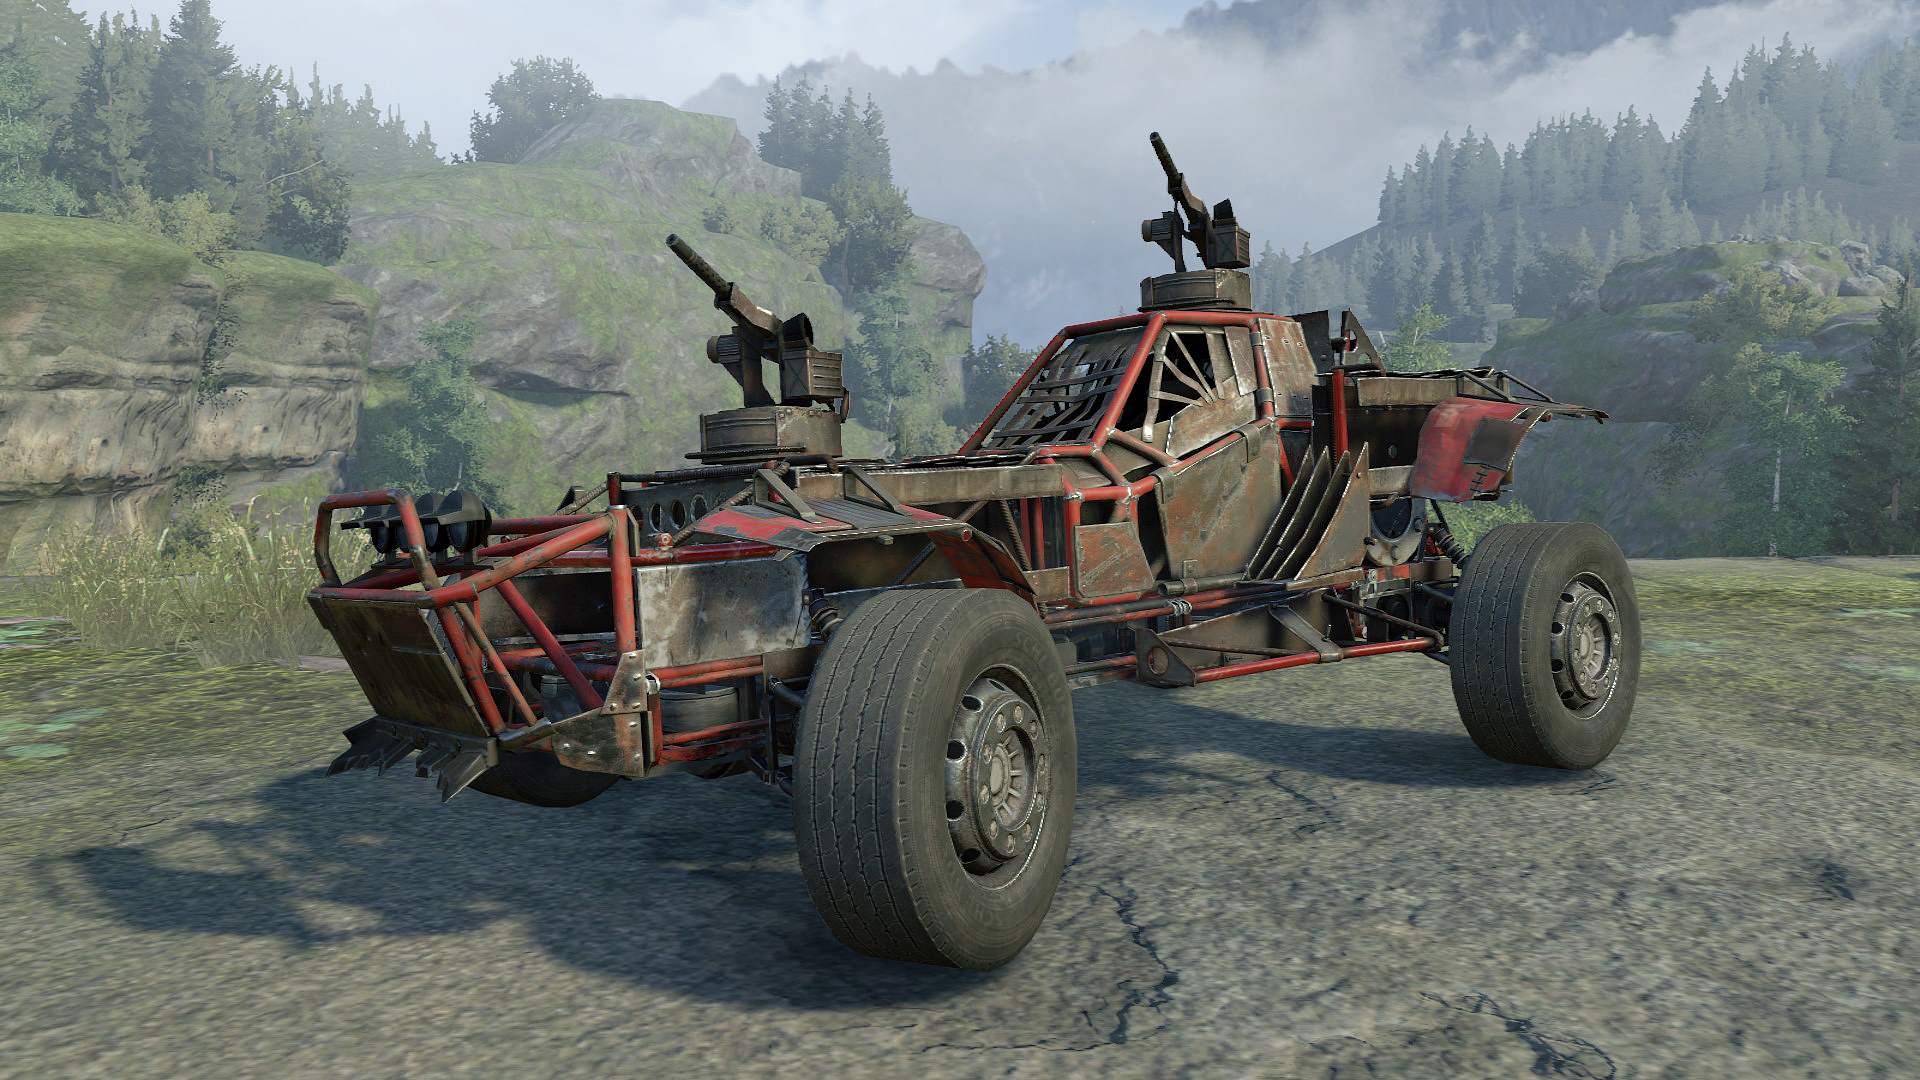 crossout price download free